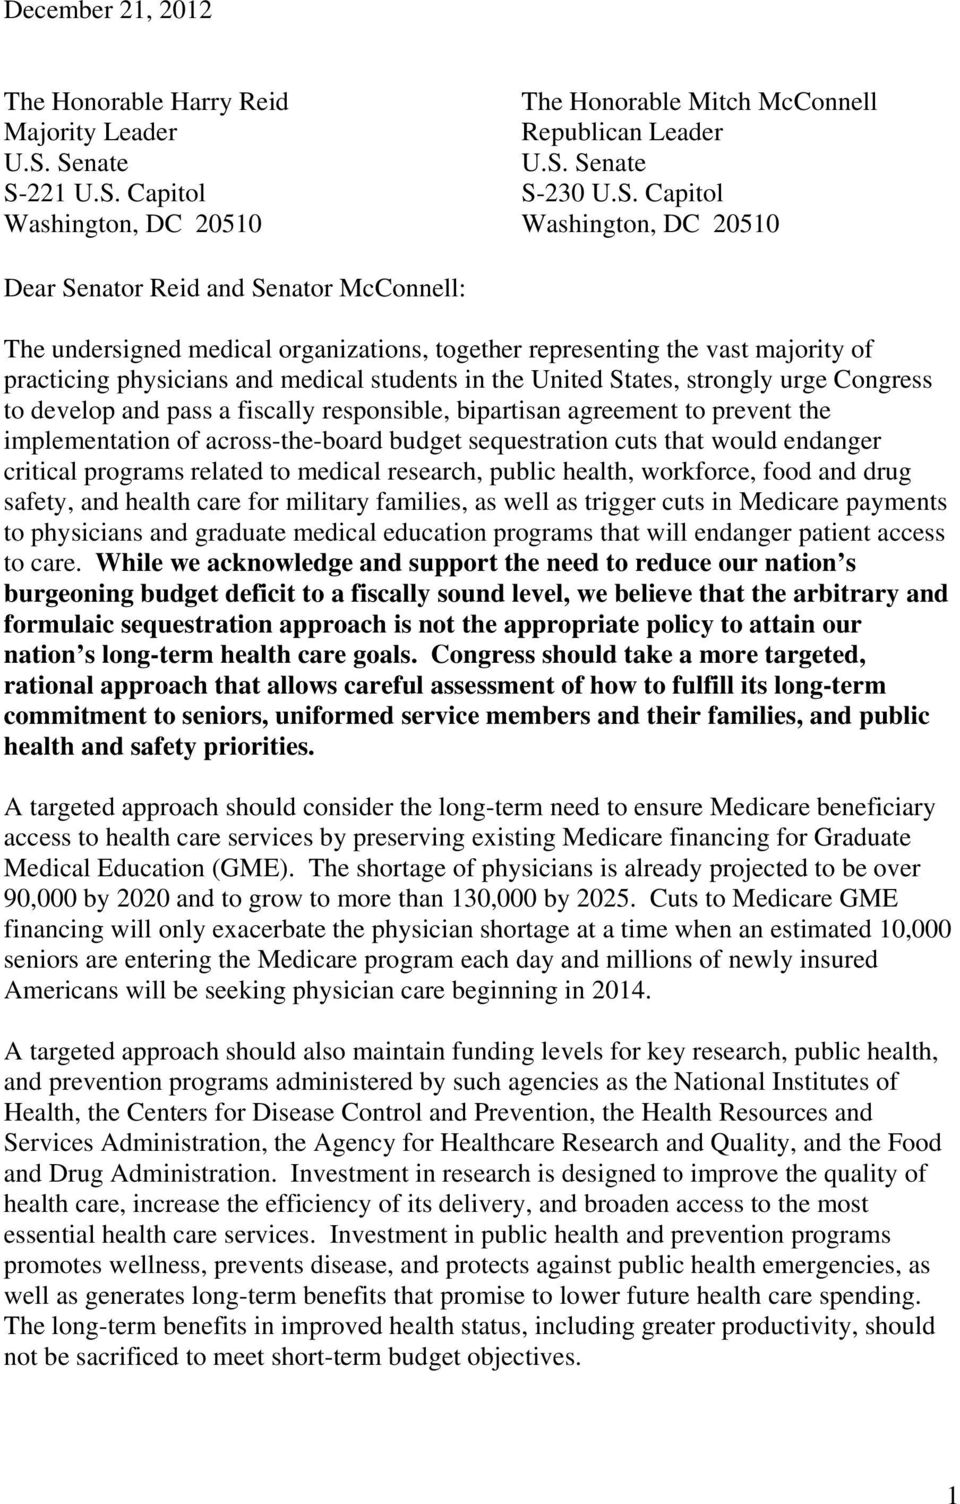 undersigned medical organizations, together representing the vast majority of practicing physicians and medical students in the United States, strongly urge Congress to develop and pass a fiscally